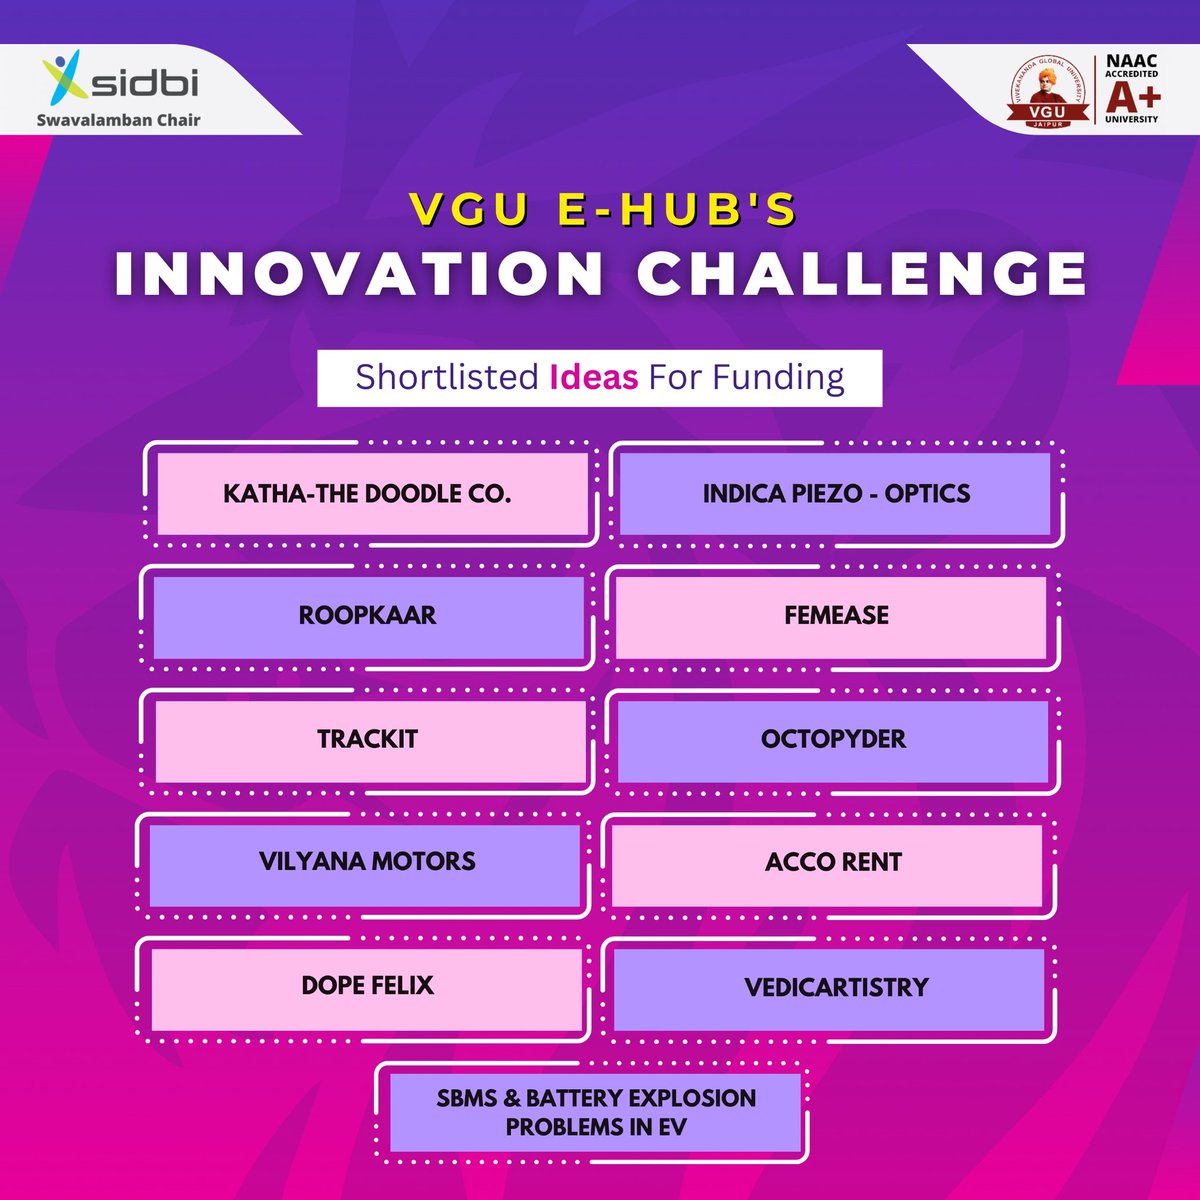 *🌟 Drumroll, please! 🌟* *We're thrilled to announce the winners of VGU E Hub's Innovation Challenge!* 🏆 After careful consideration, 11 incredible ideas have been shortlisted to receive funding. Congratulations to all the winners! 🚀